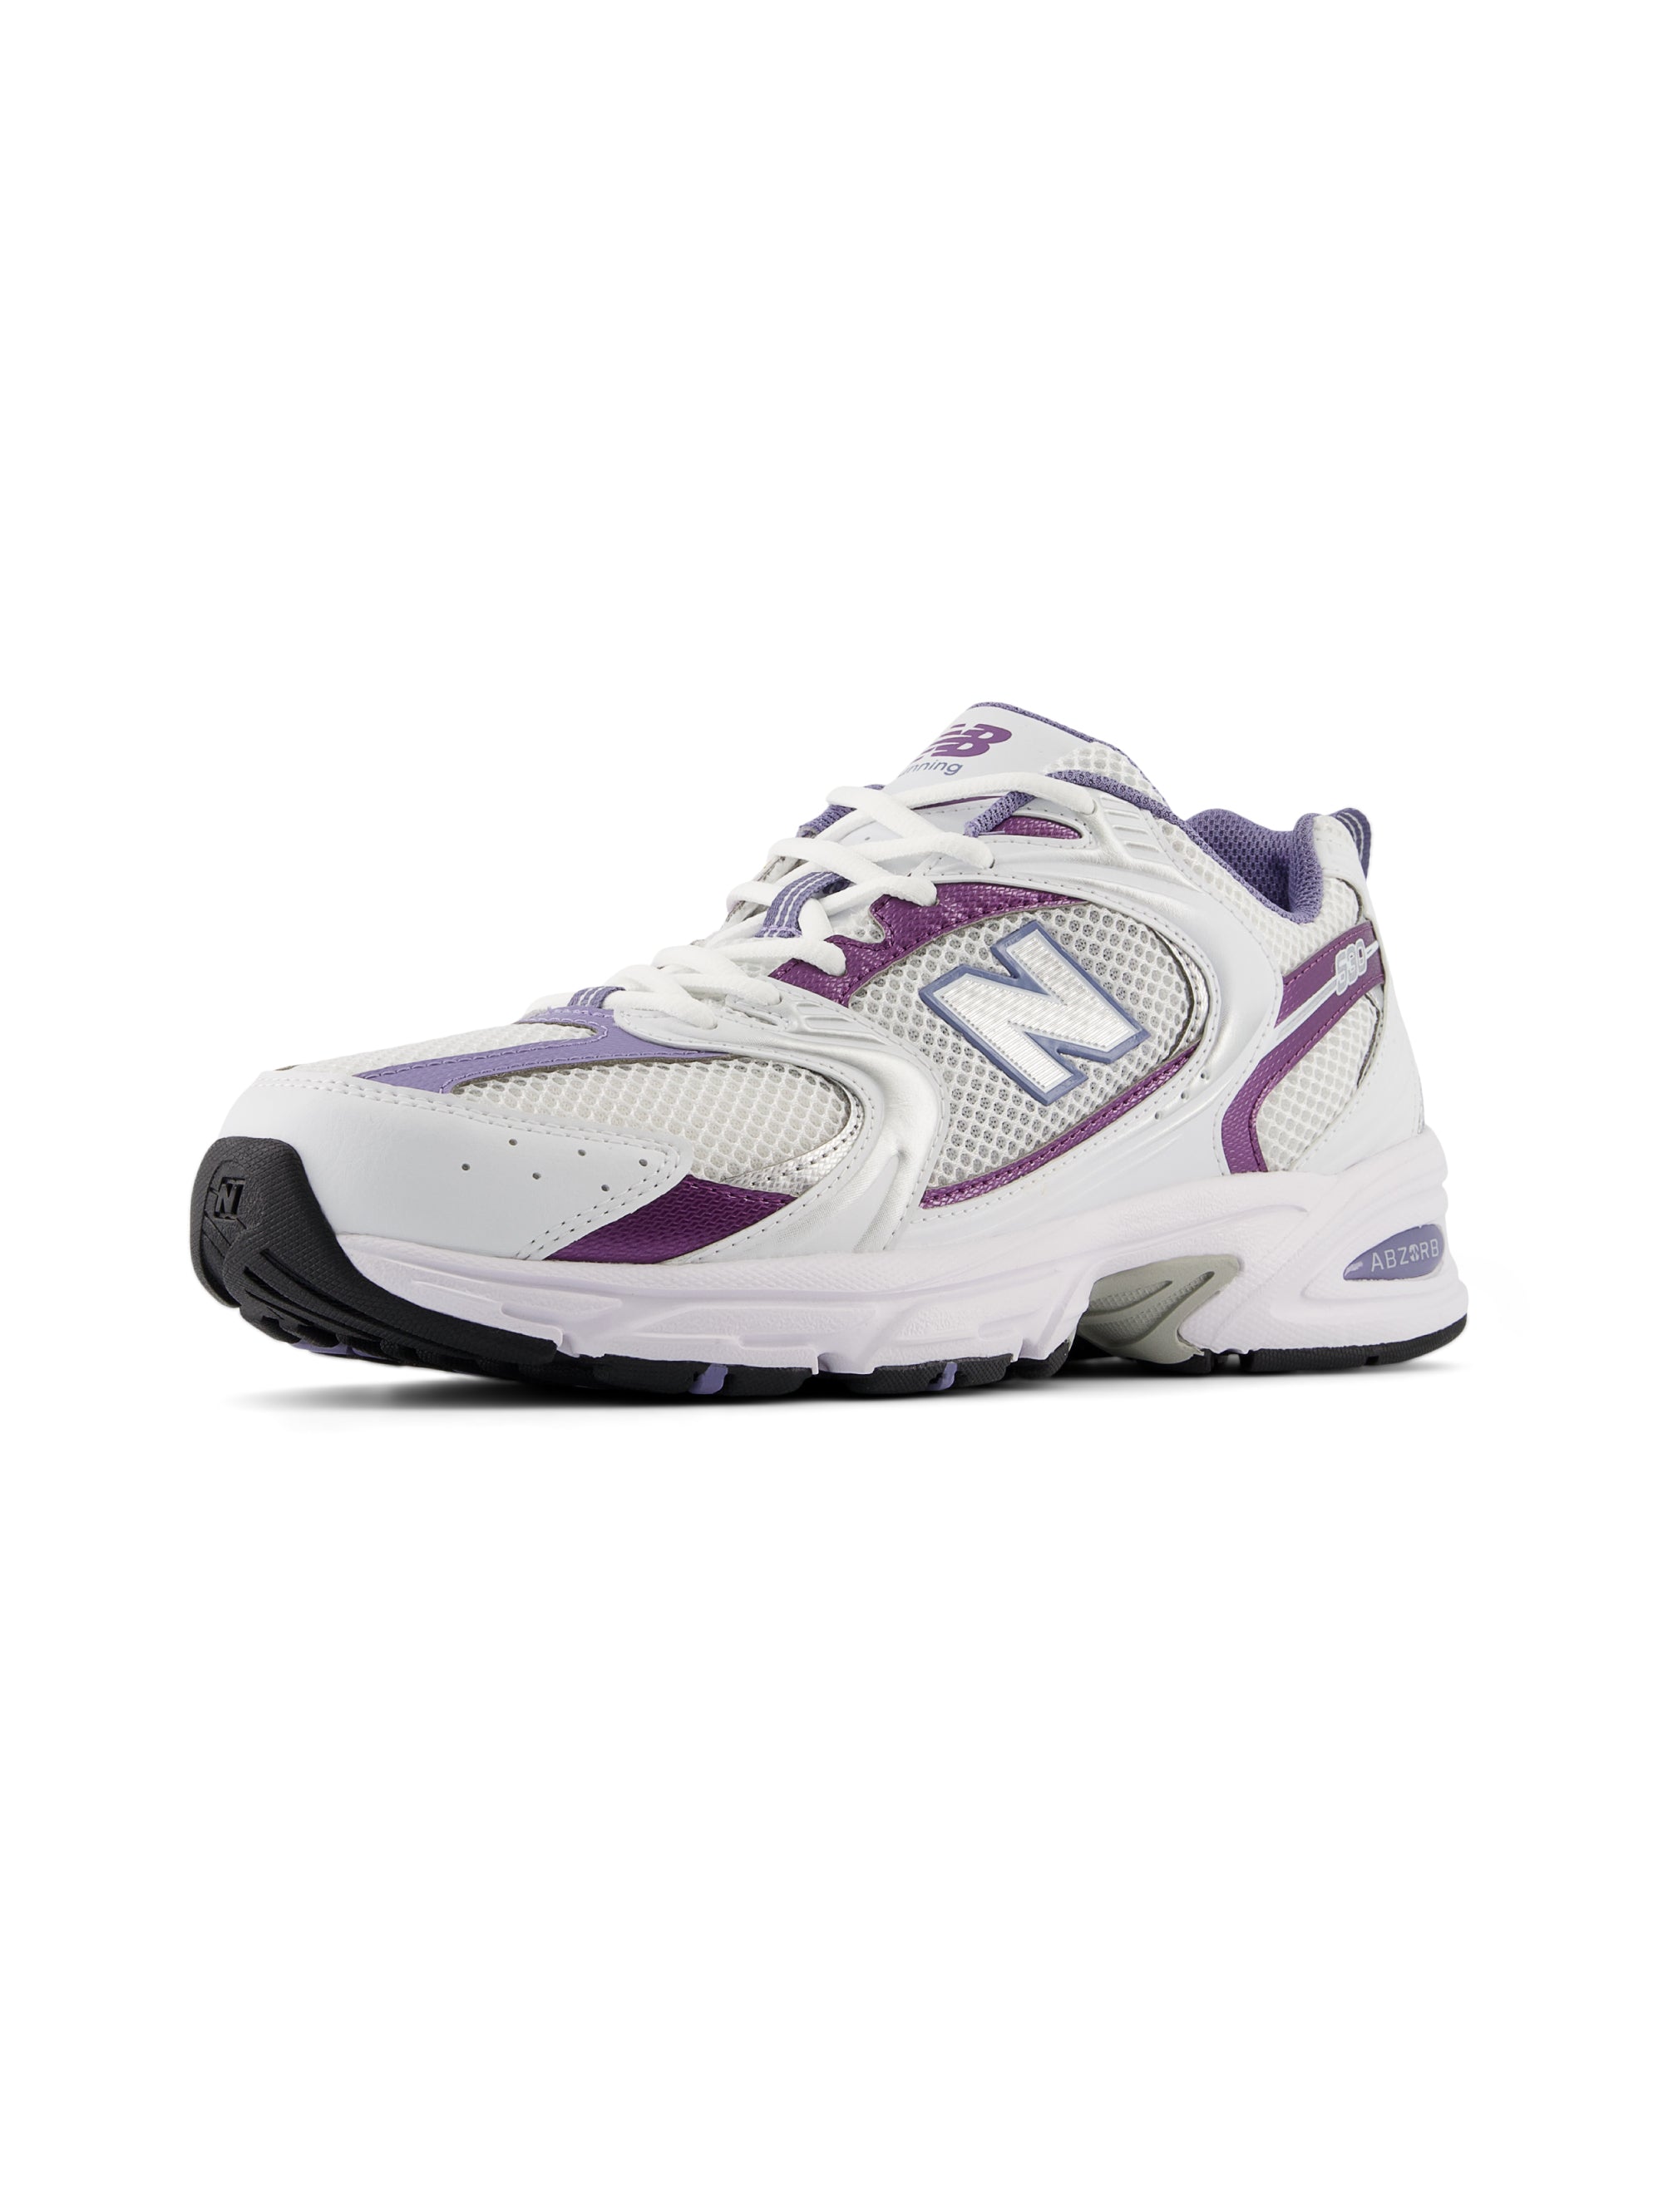 530 Sneakers for Women Lifestyle Reflection White/Purple